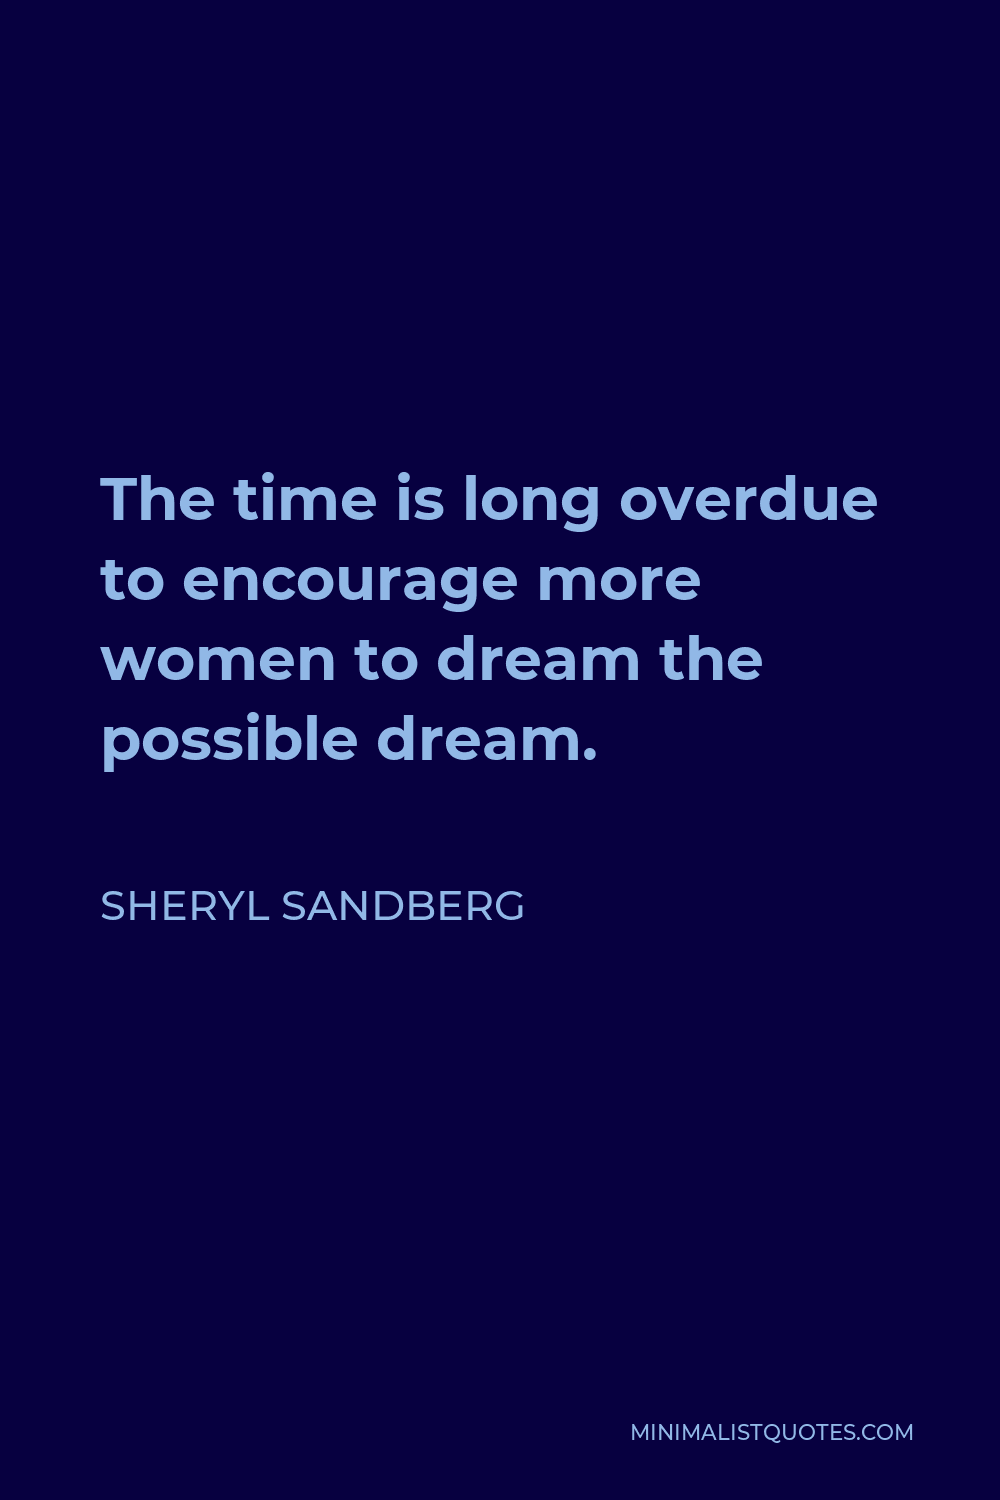 Sheryl Sandberg Quote - The time is long overdue to encourage more women to dream the possible dream.